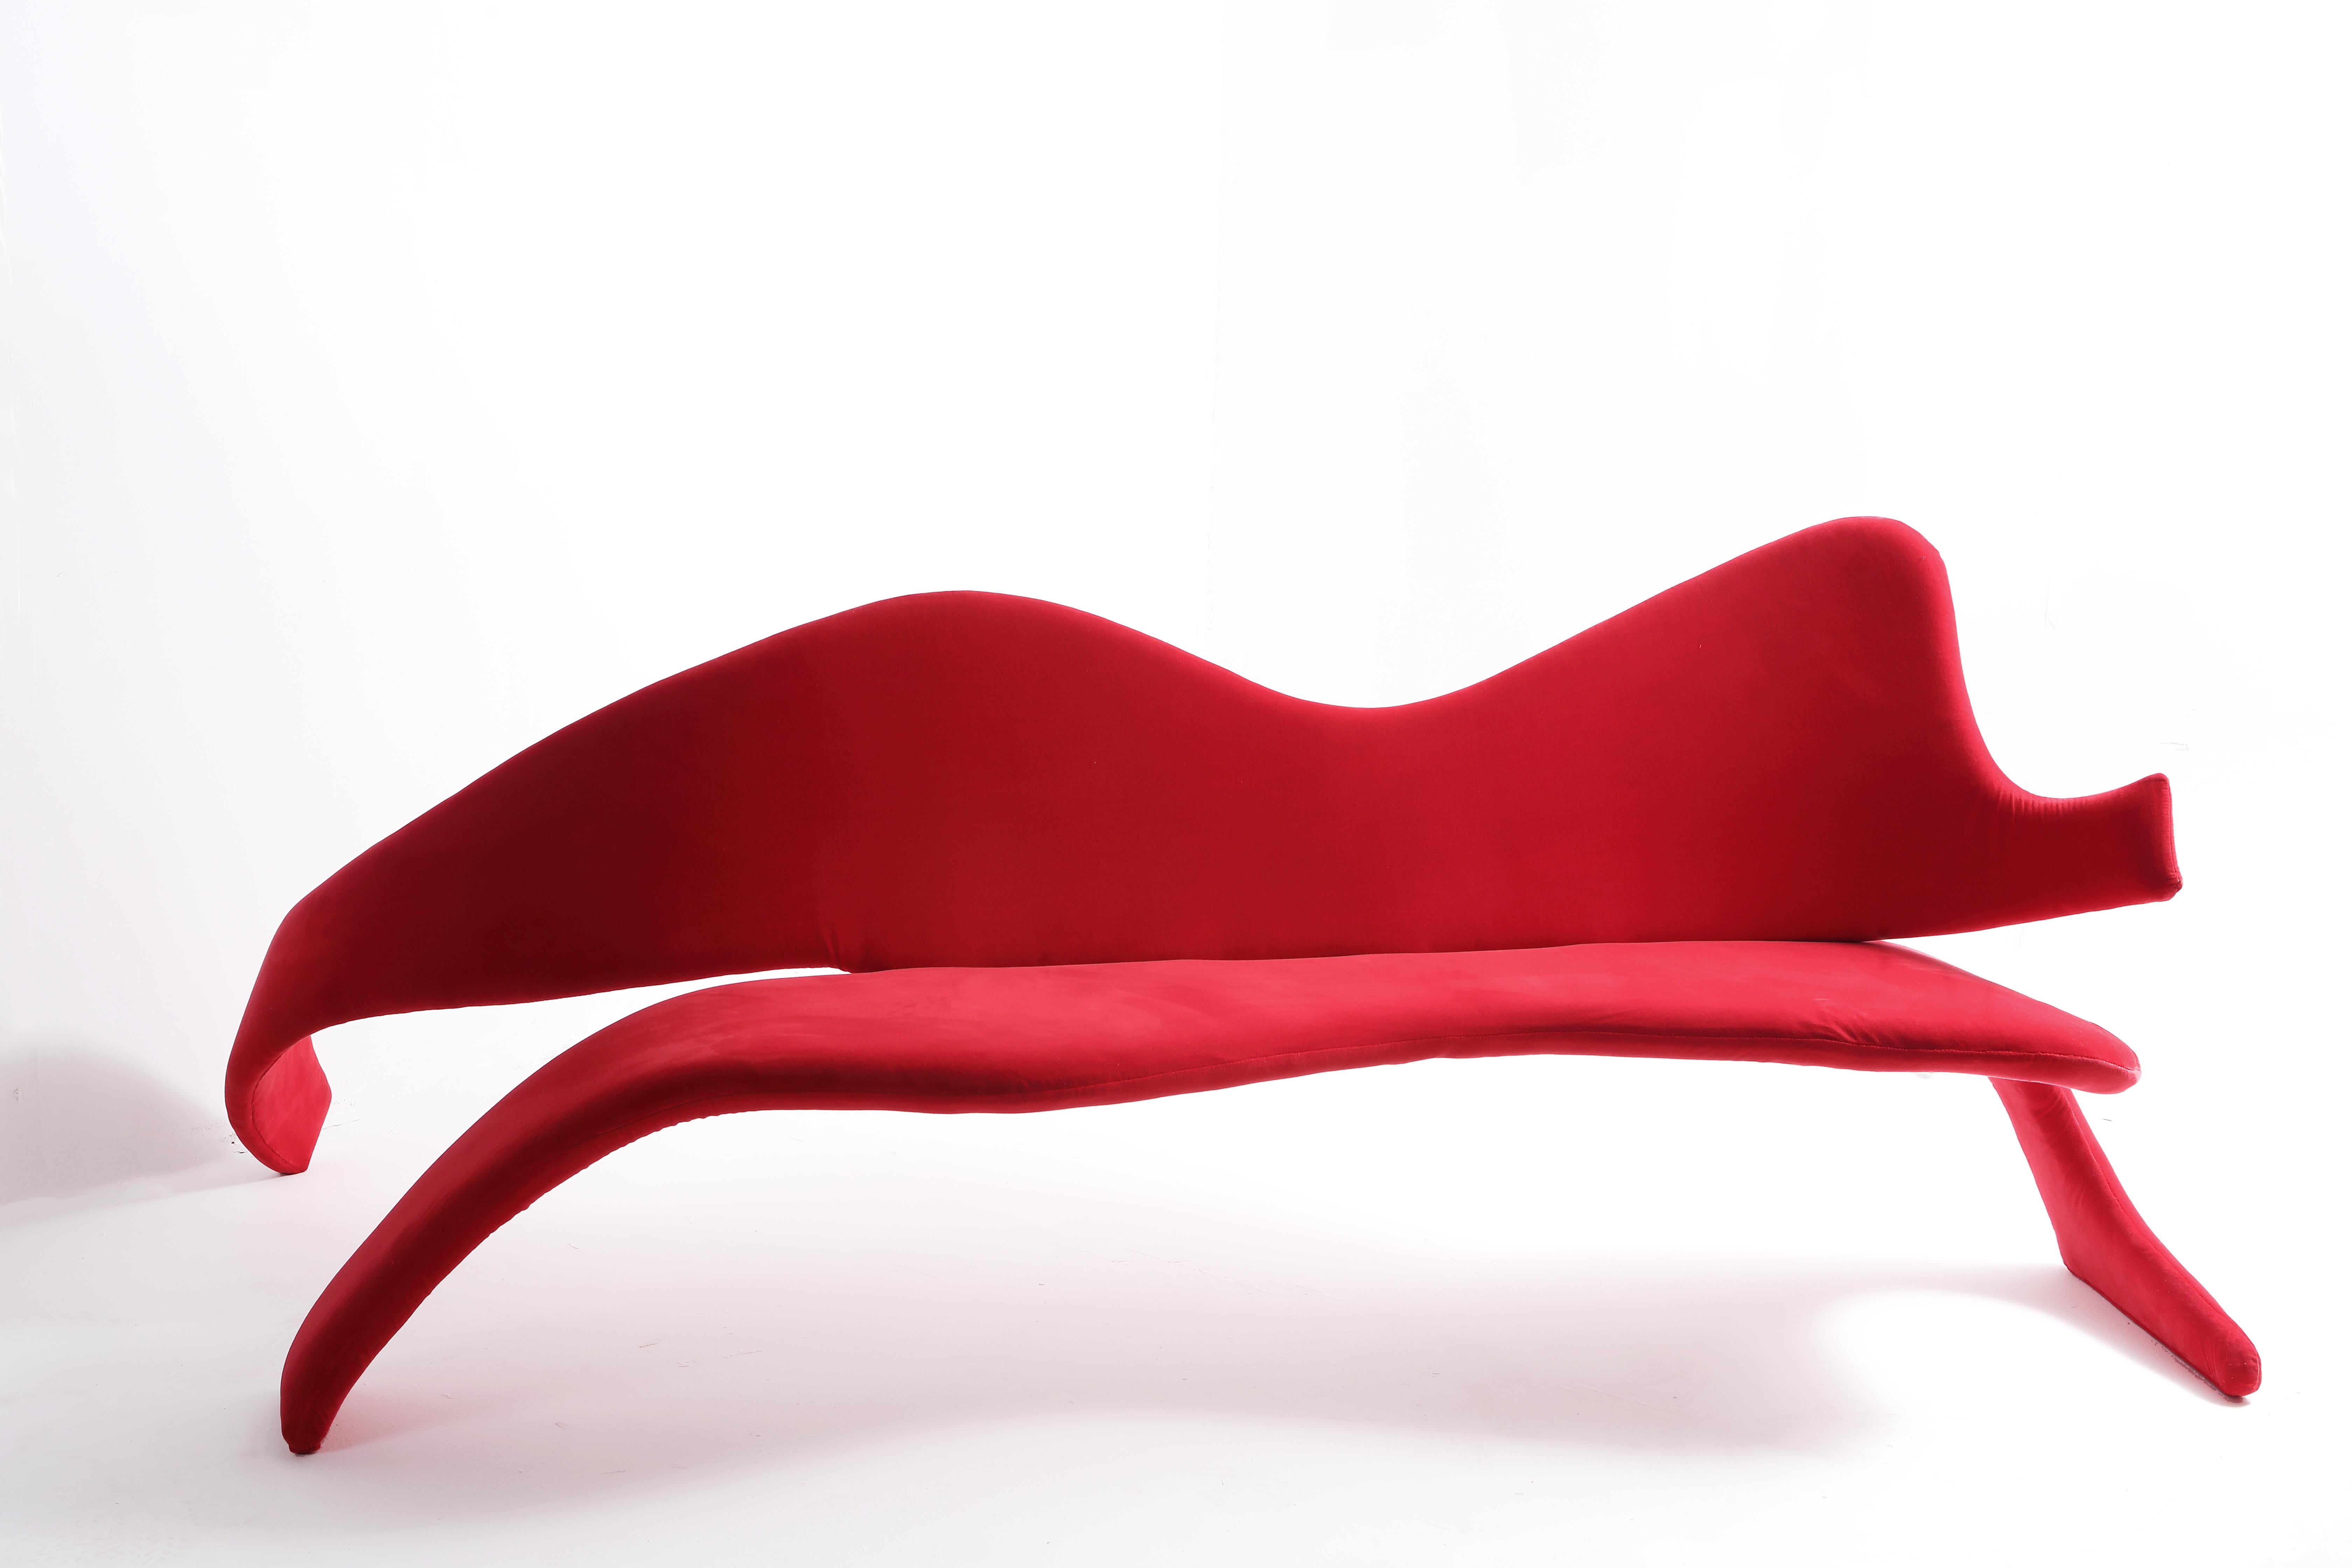 Afrodite bench by Mameluca
Material: steel, foam, velvet
Dimensions: D 240 x W 100 x H 90 cm

With reference to Paul Nacke’s theories about Narcissism, an attitude of a person who treats his own body in the same way as the body of a sexual